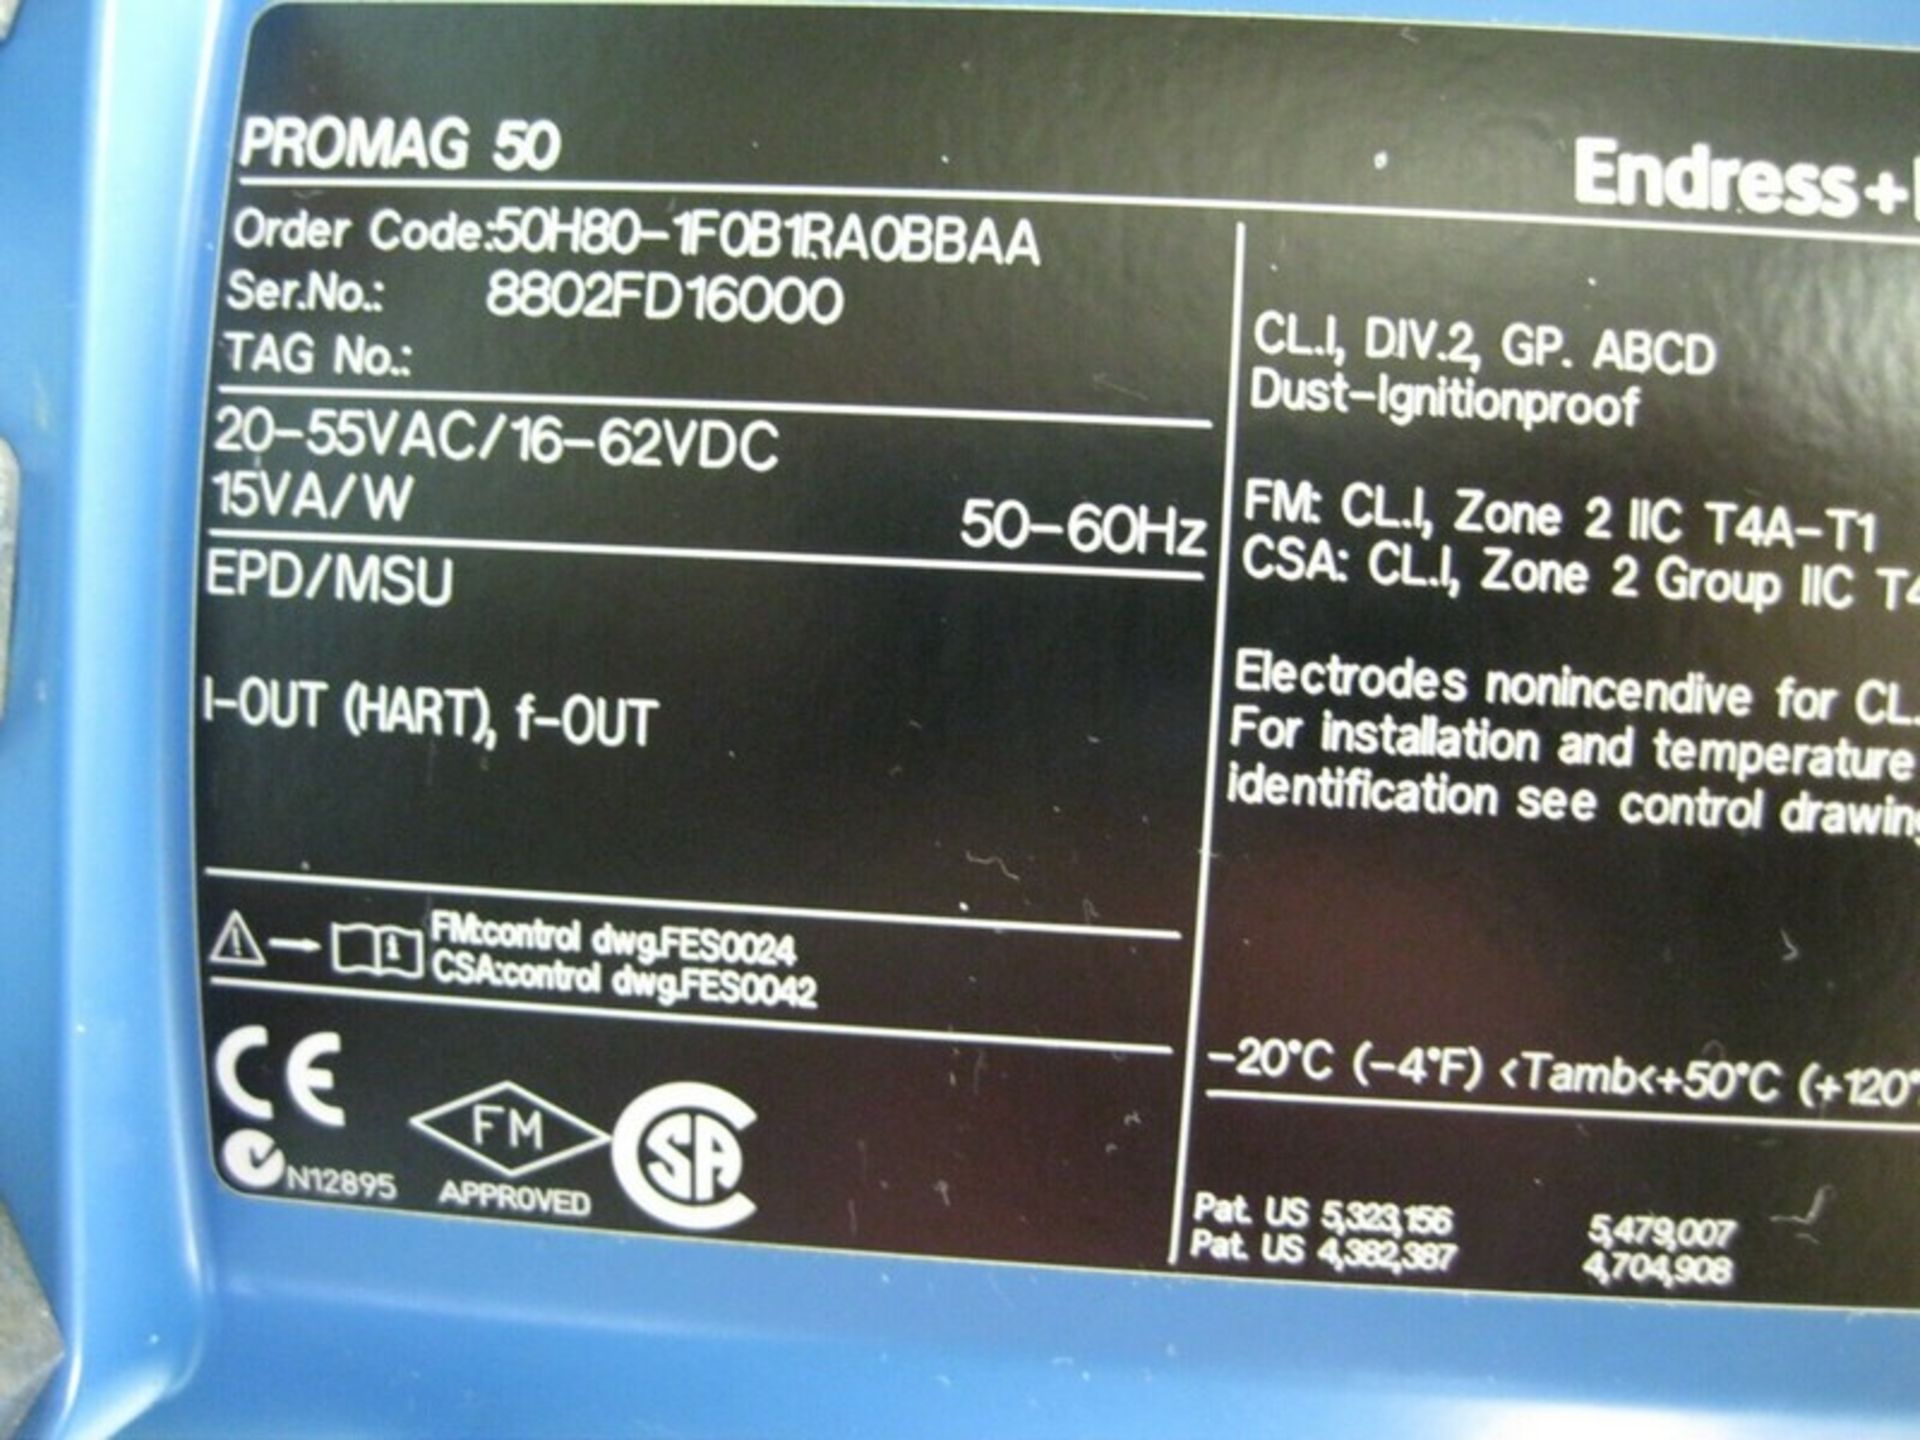 3" Endress Hauser 50H80-1F0B1RA0BBAA Promag 50 H Flowmeter (POWERED FOR AC ONLY - NO DC POWER) - Image 7 of 8